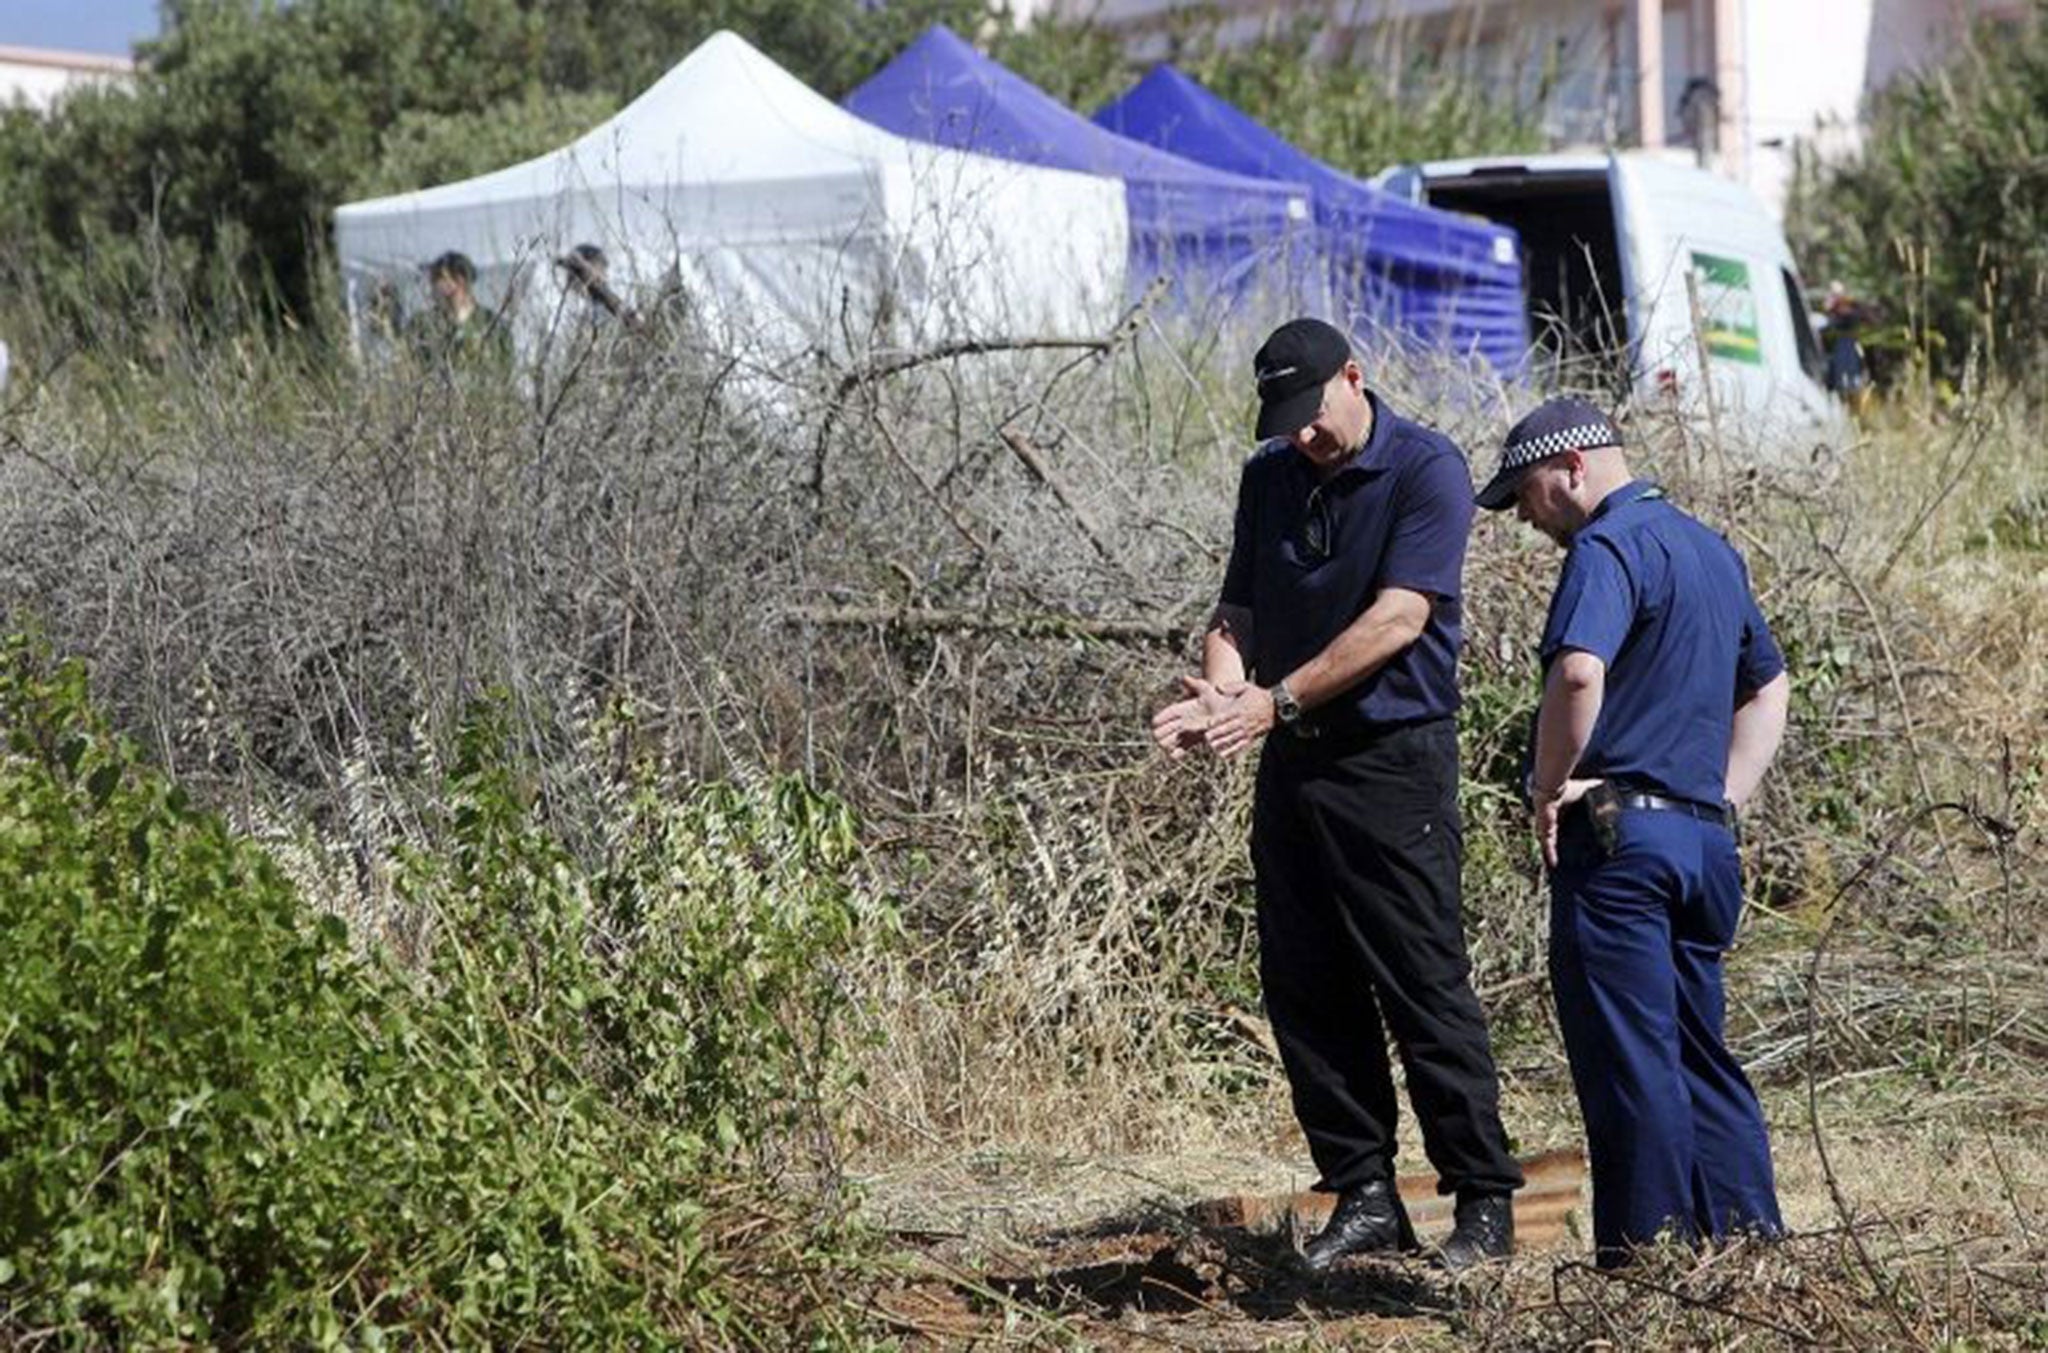 British police search scrubland next to a newly-erected tent in the search for Madeleine McCann